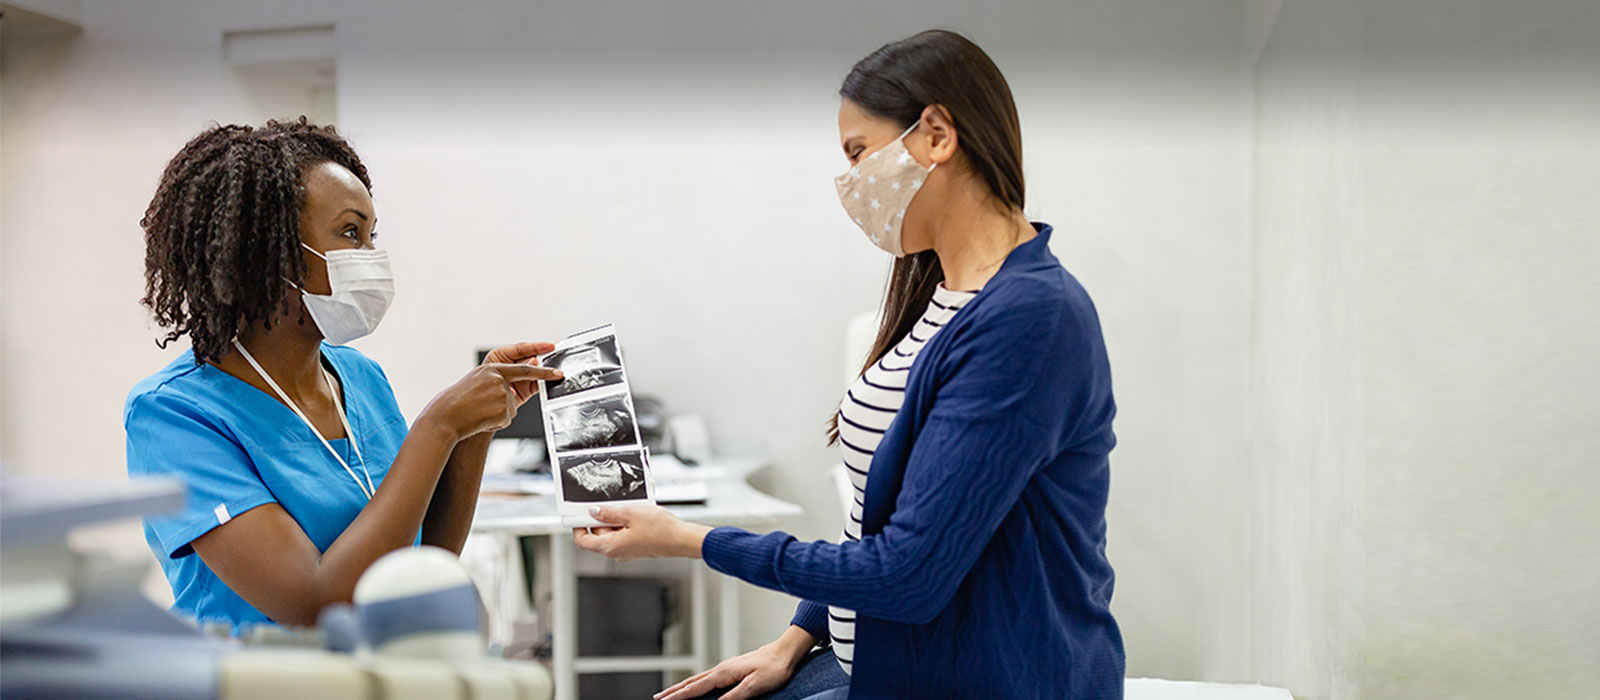 Pregnant woman reviewing sonograph image with nurse